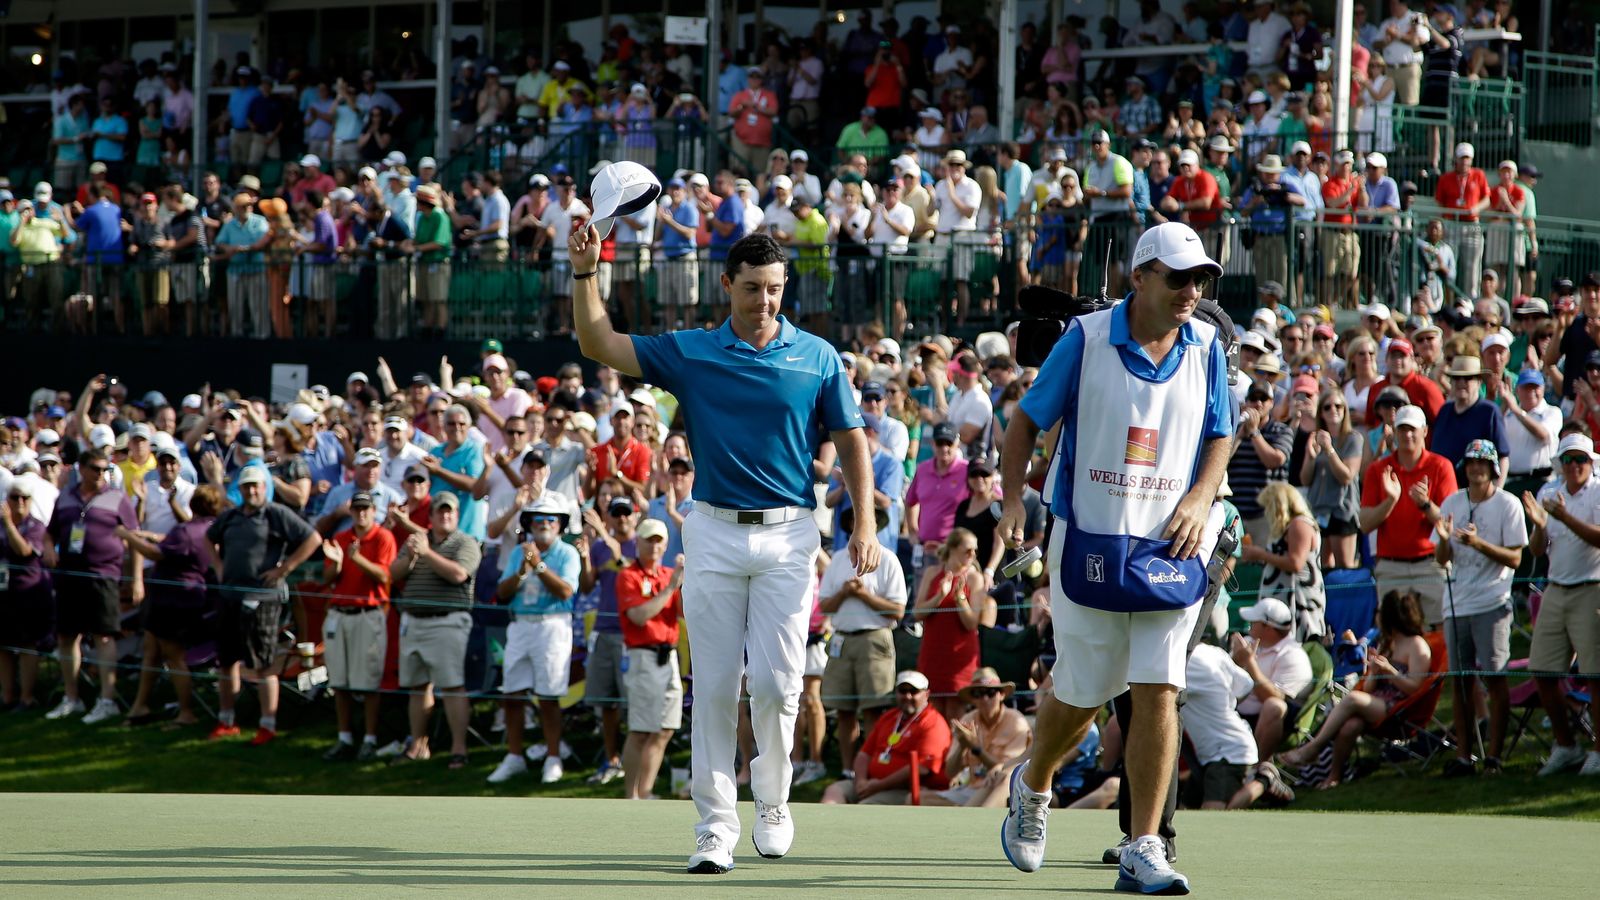 Rory McIlroy's Wells Fargo Championship victory revisited Golf News Sky Sports